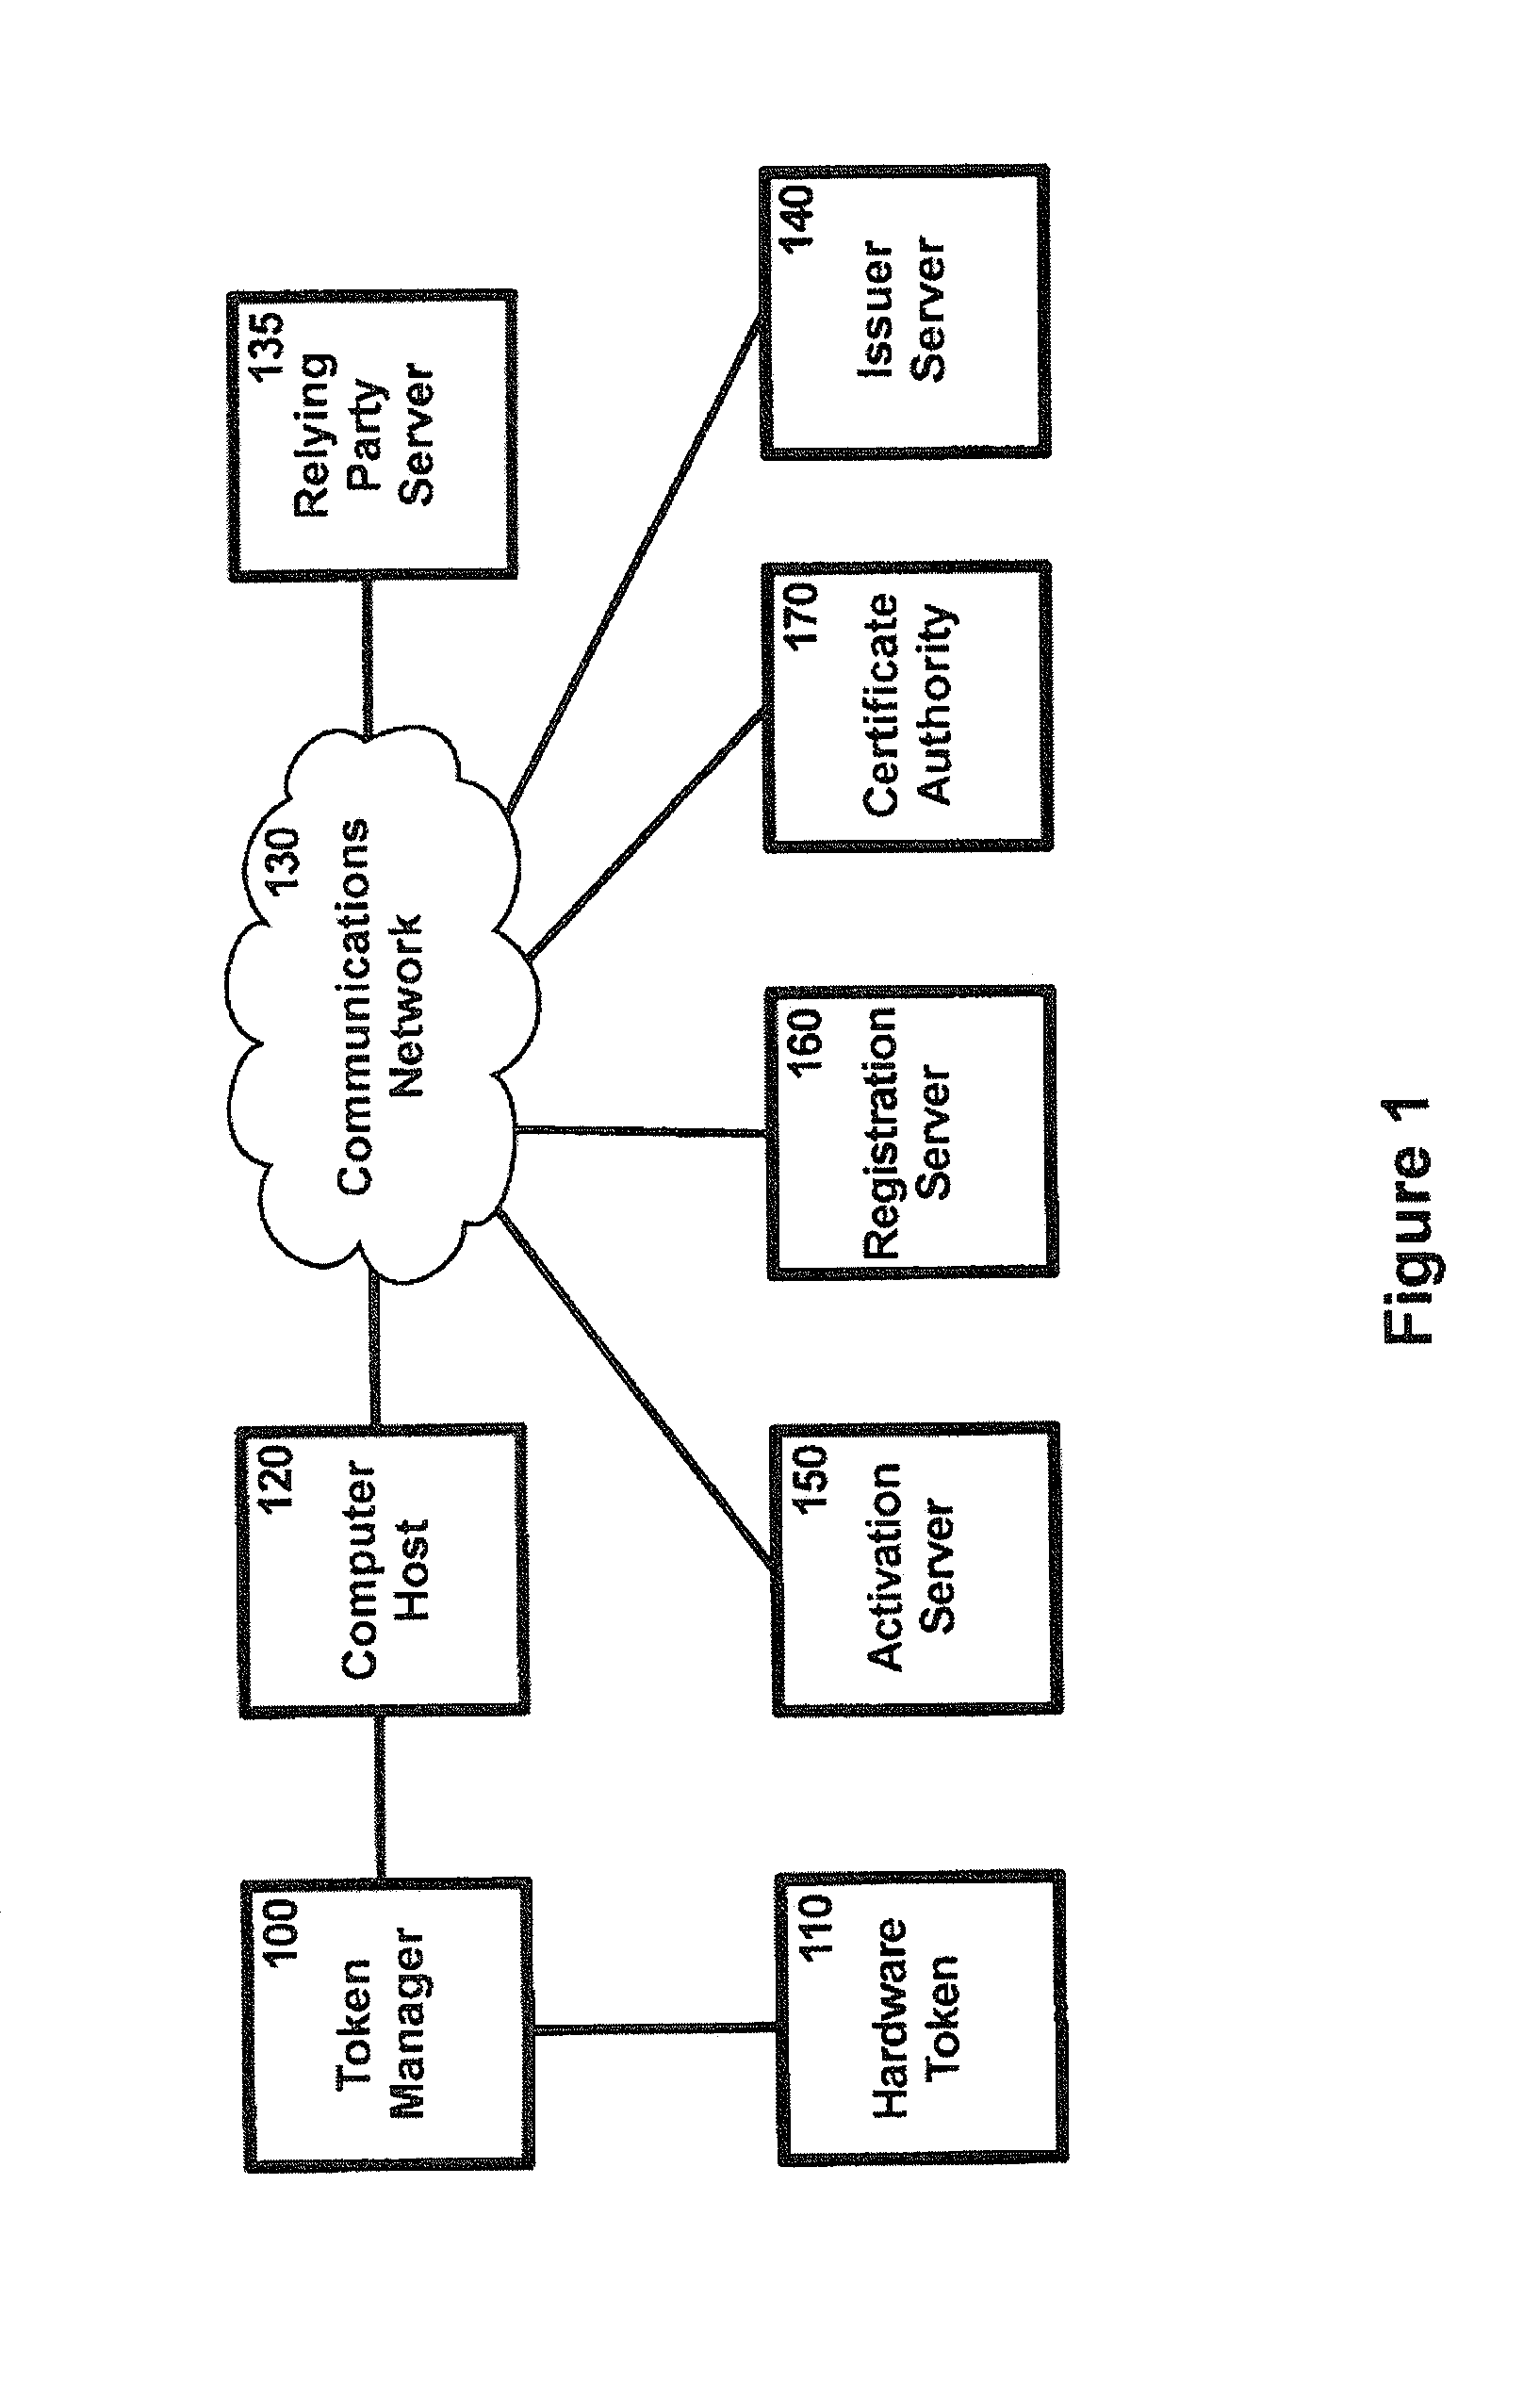 System and methods for online authentication